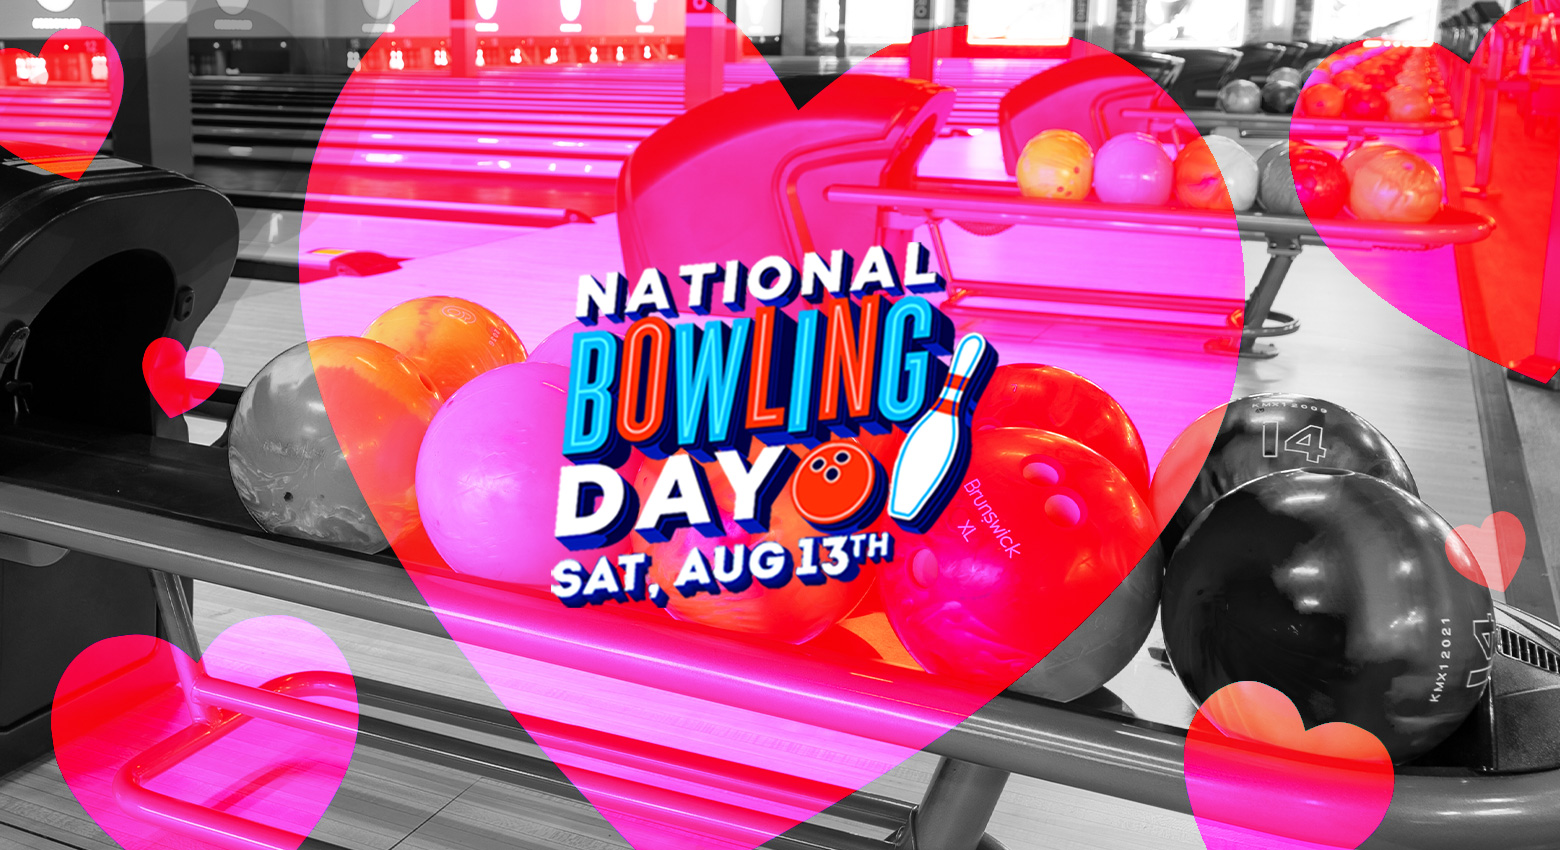 National Bowling Day - Saturday August 13th